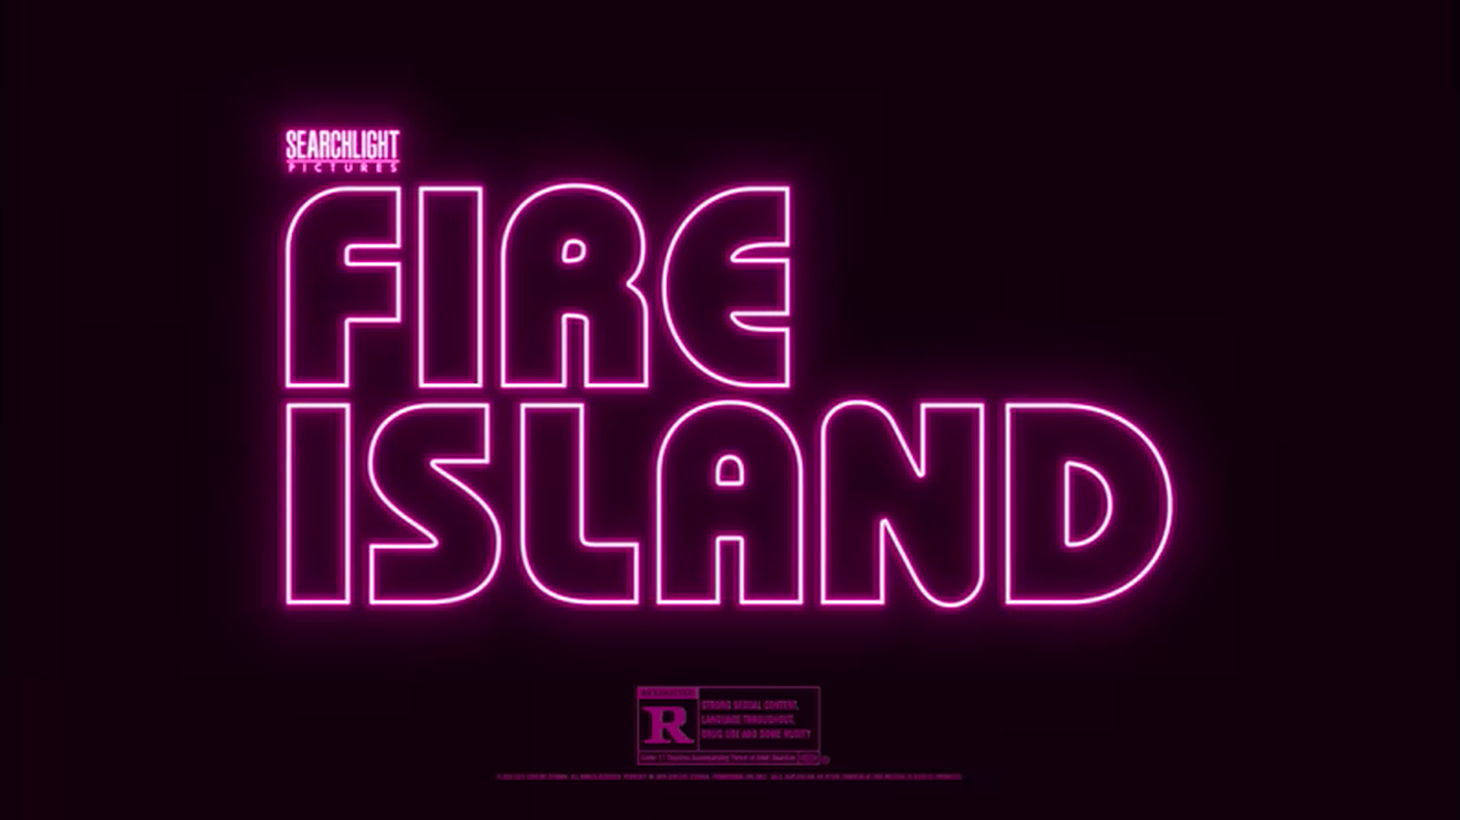 “Fire Island” is a romantic comedy starring Joel Kim Booster, Bowen Yang, and Margaret Cho.